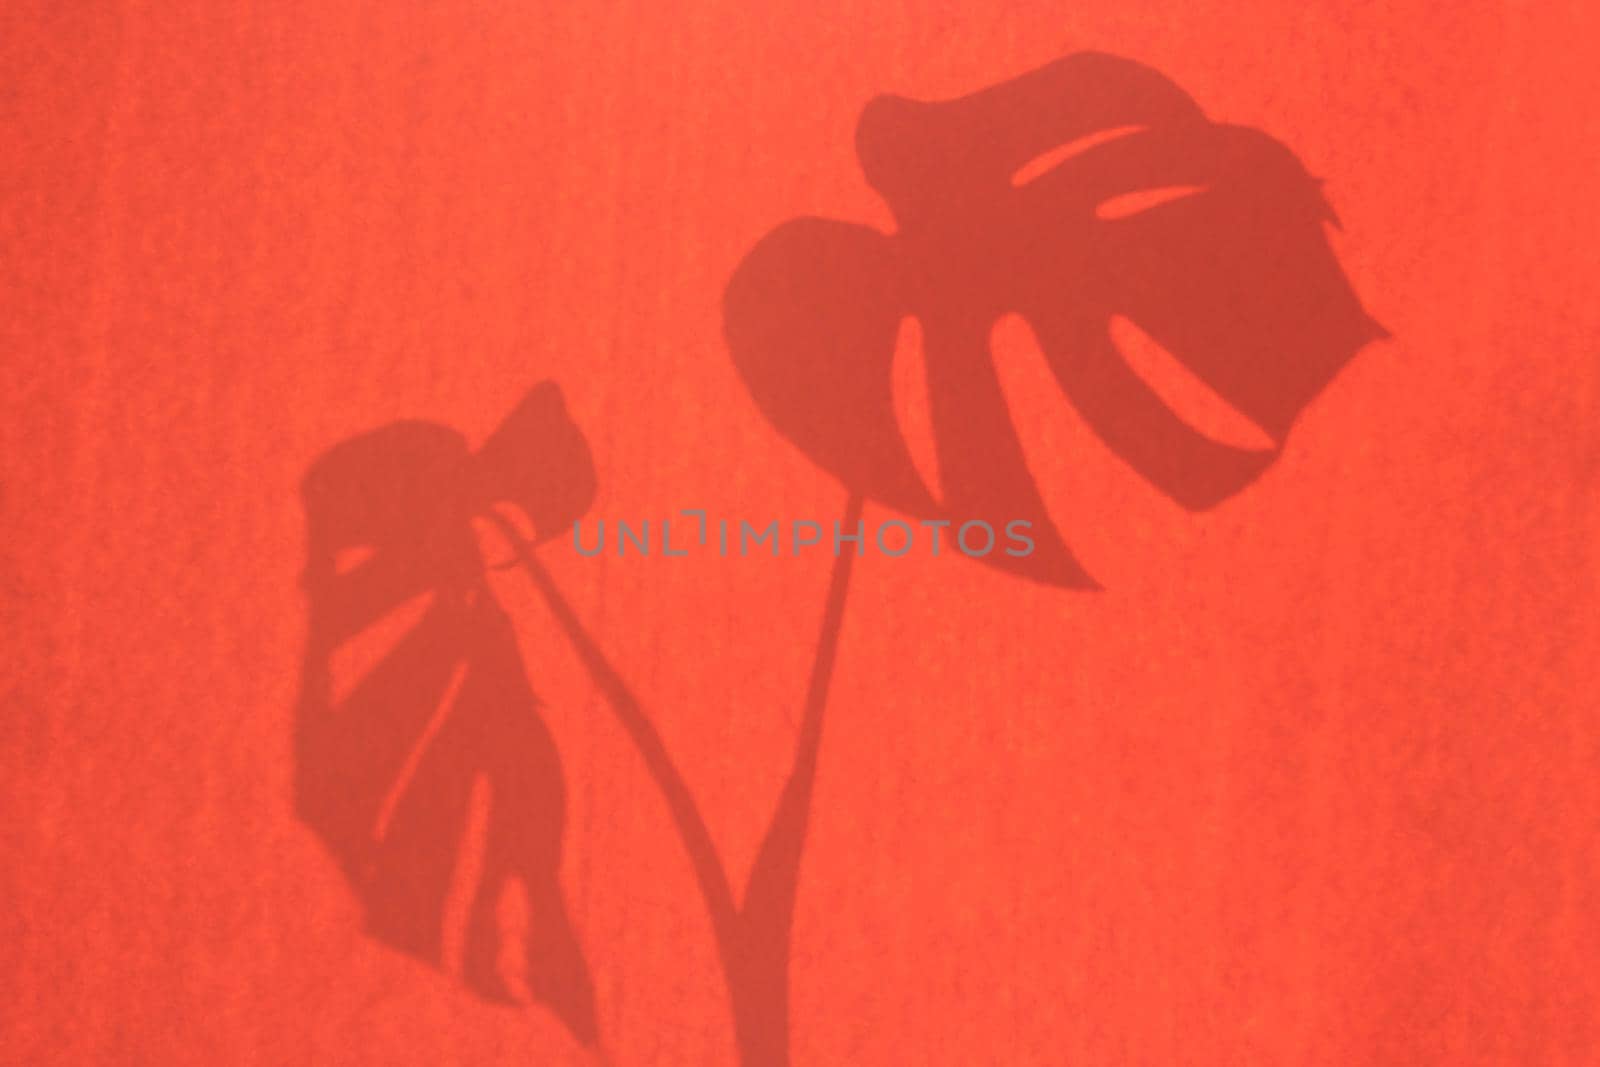 The shadow of a tropical monstera leaf on a pink background by lapushka62